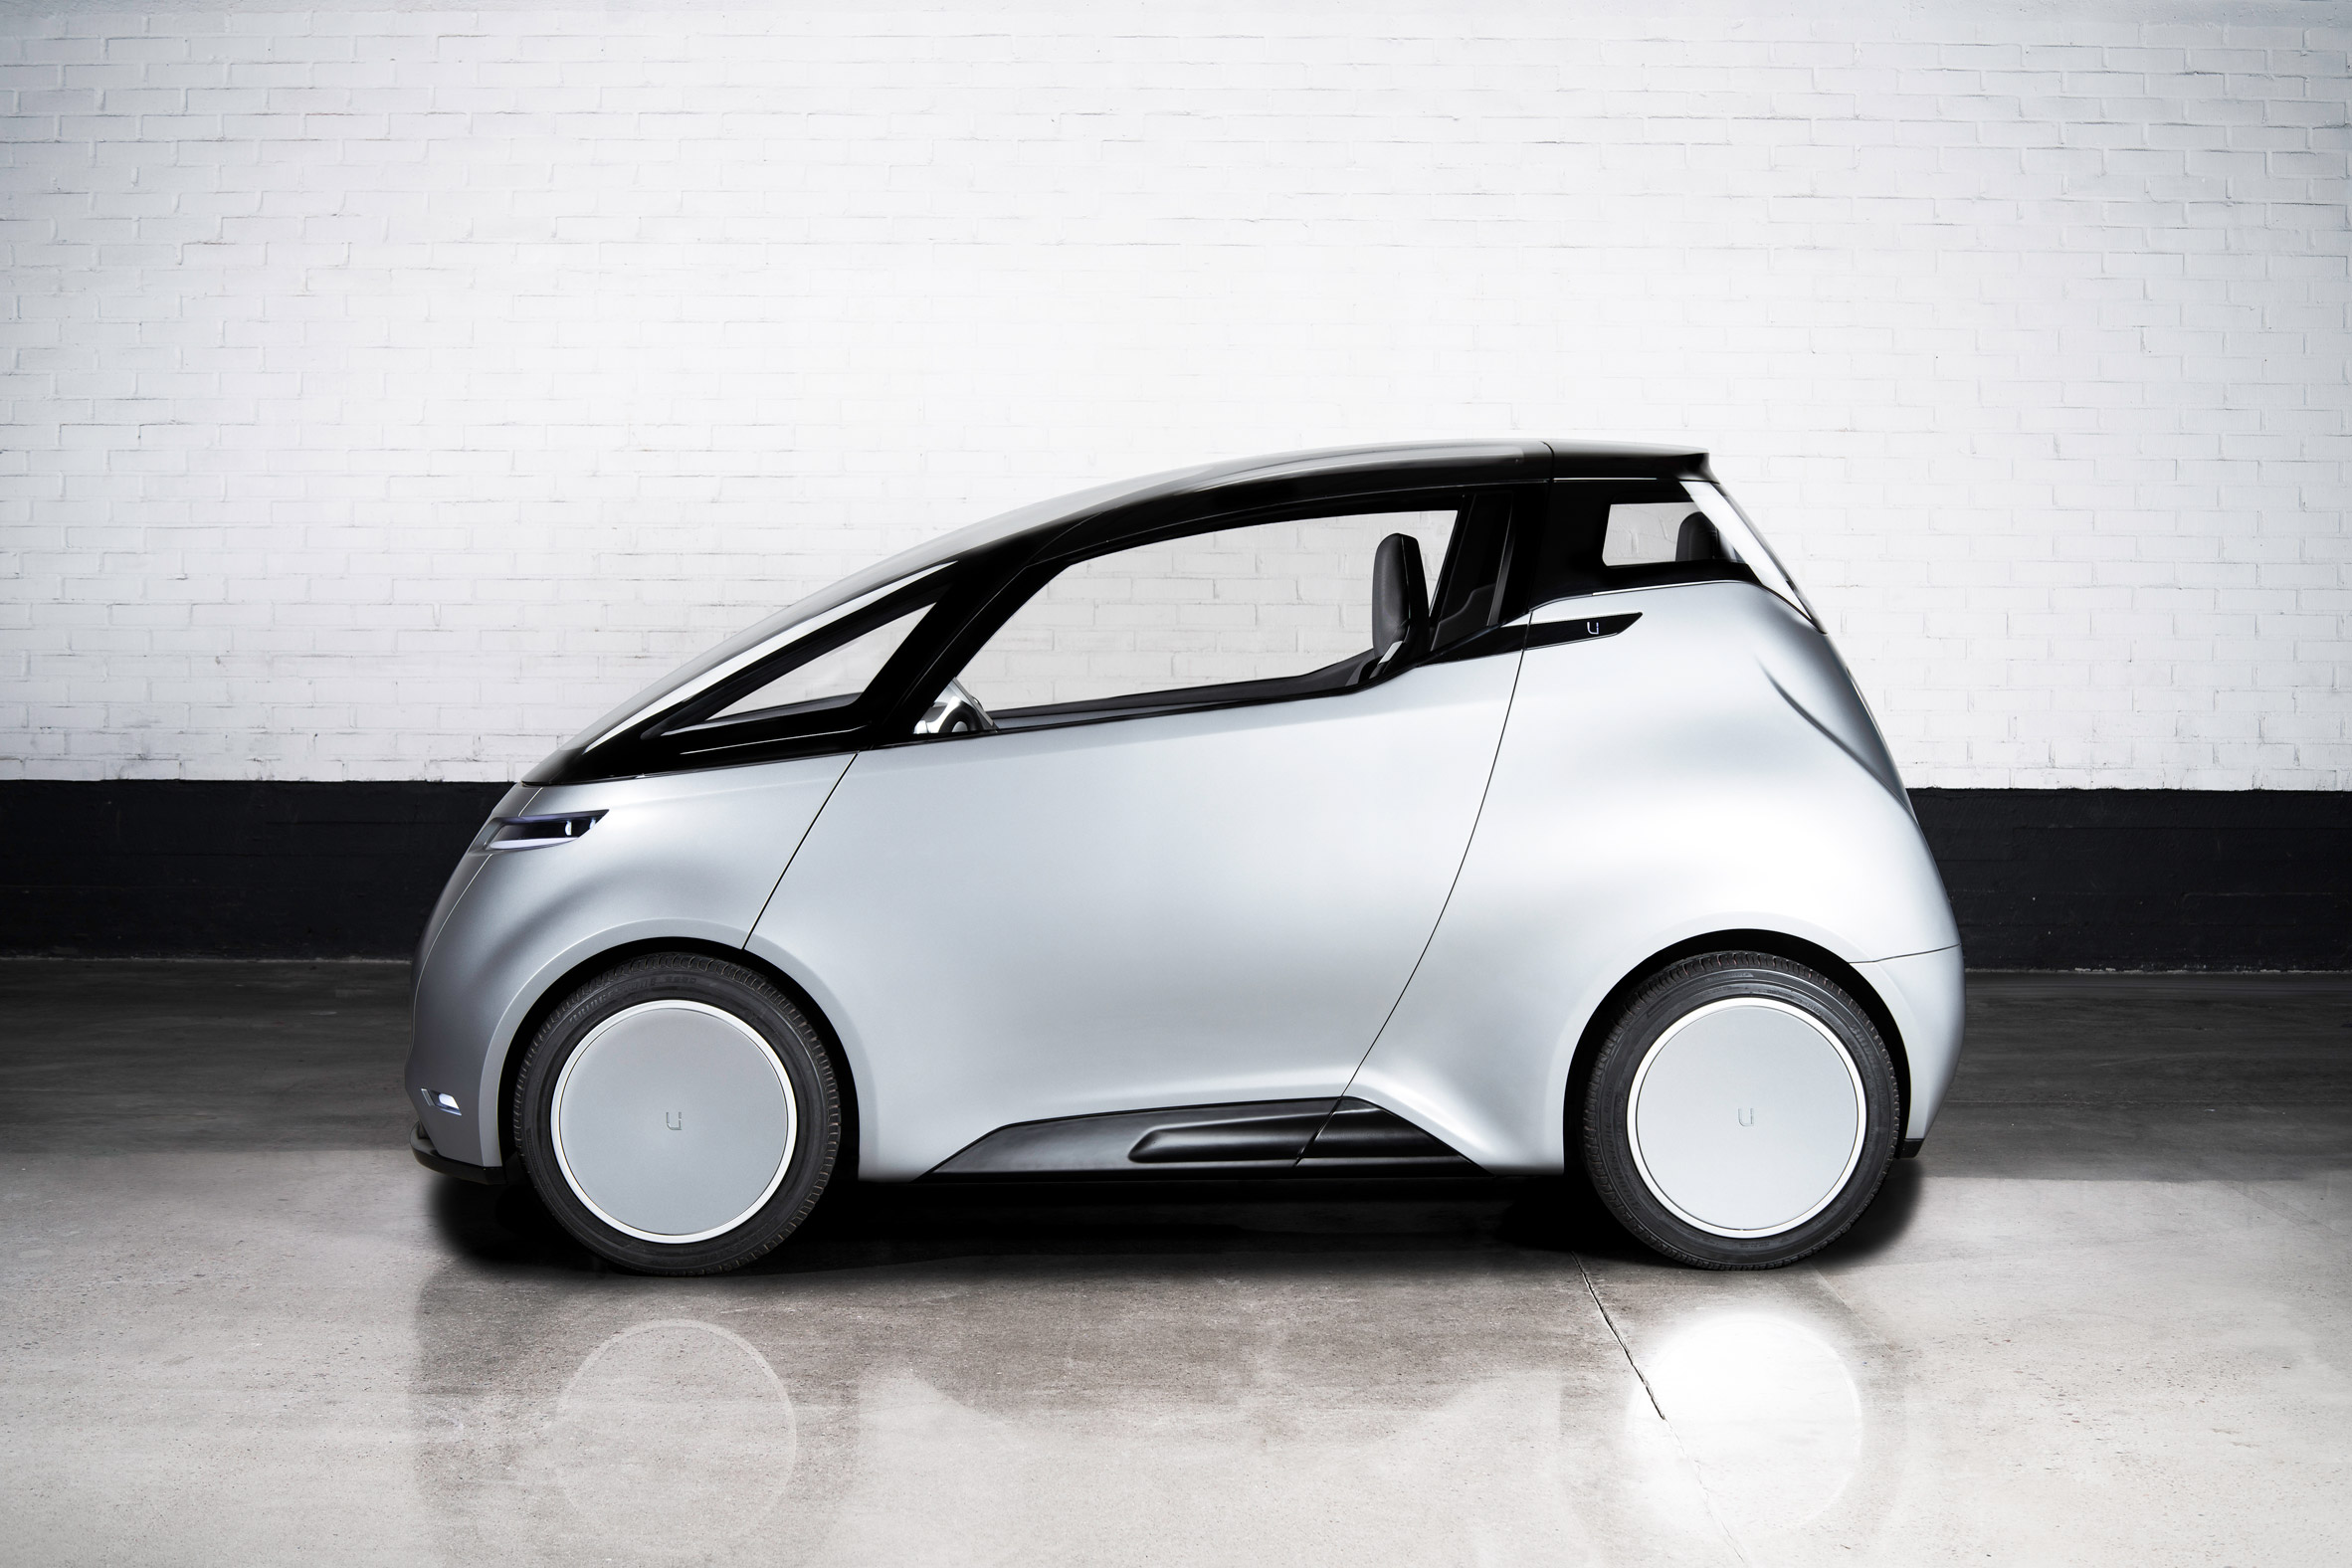 Uniti's first vehicle will be electric eco-friendly city car